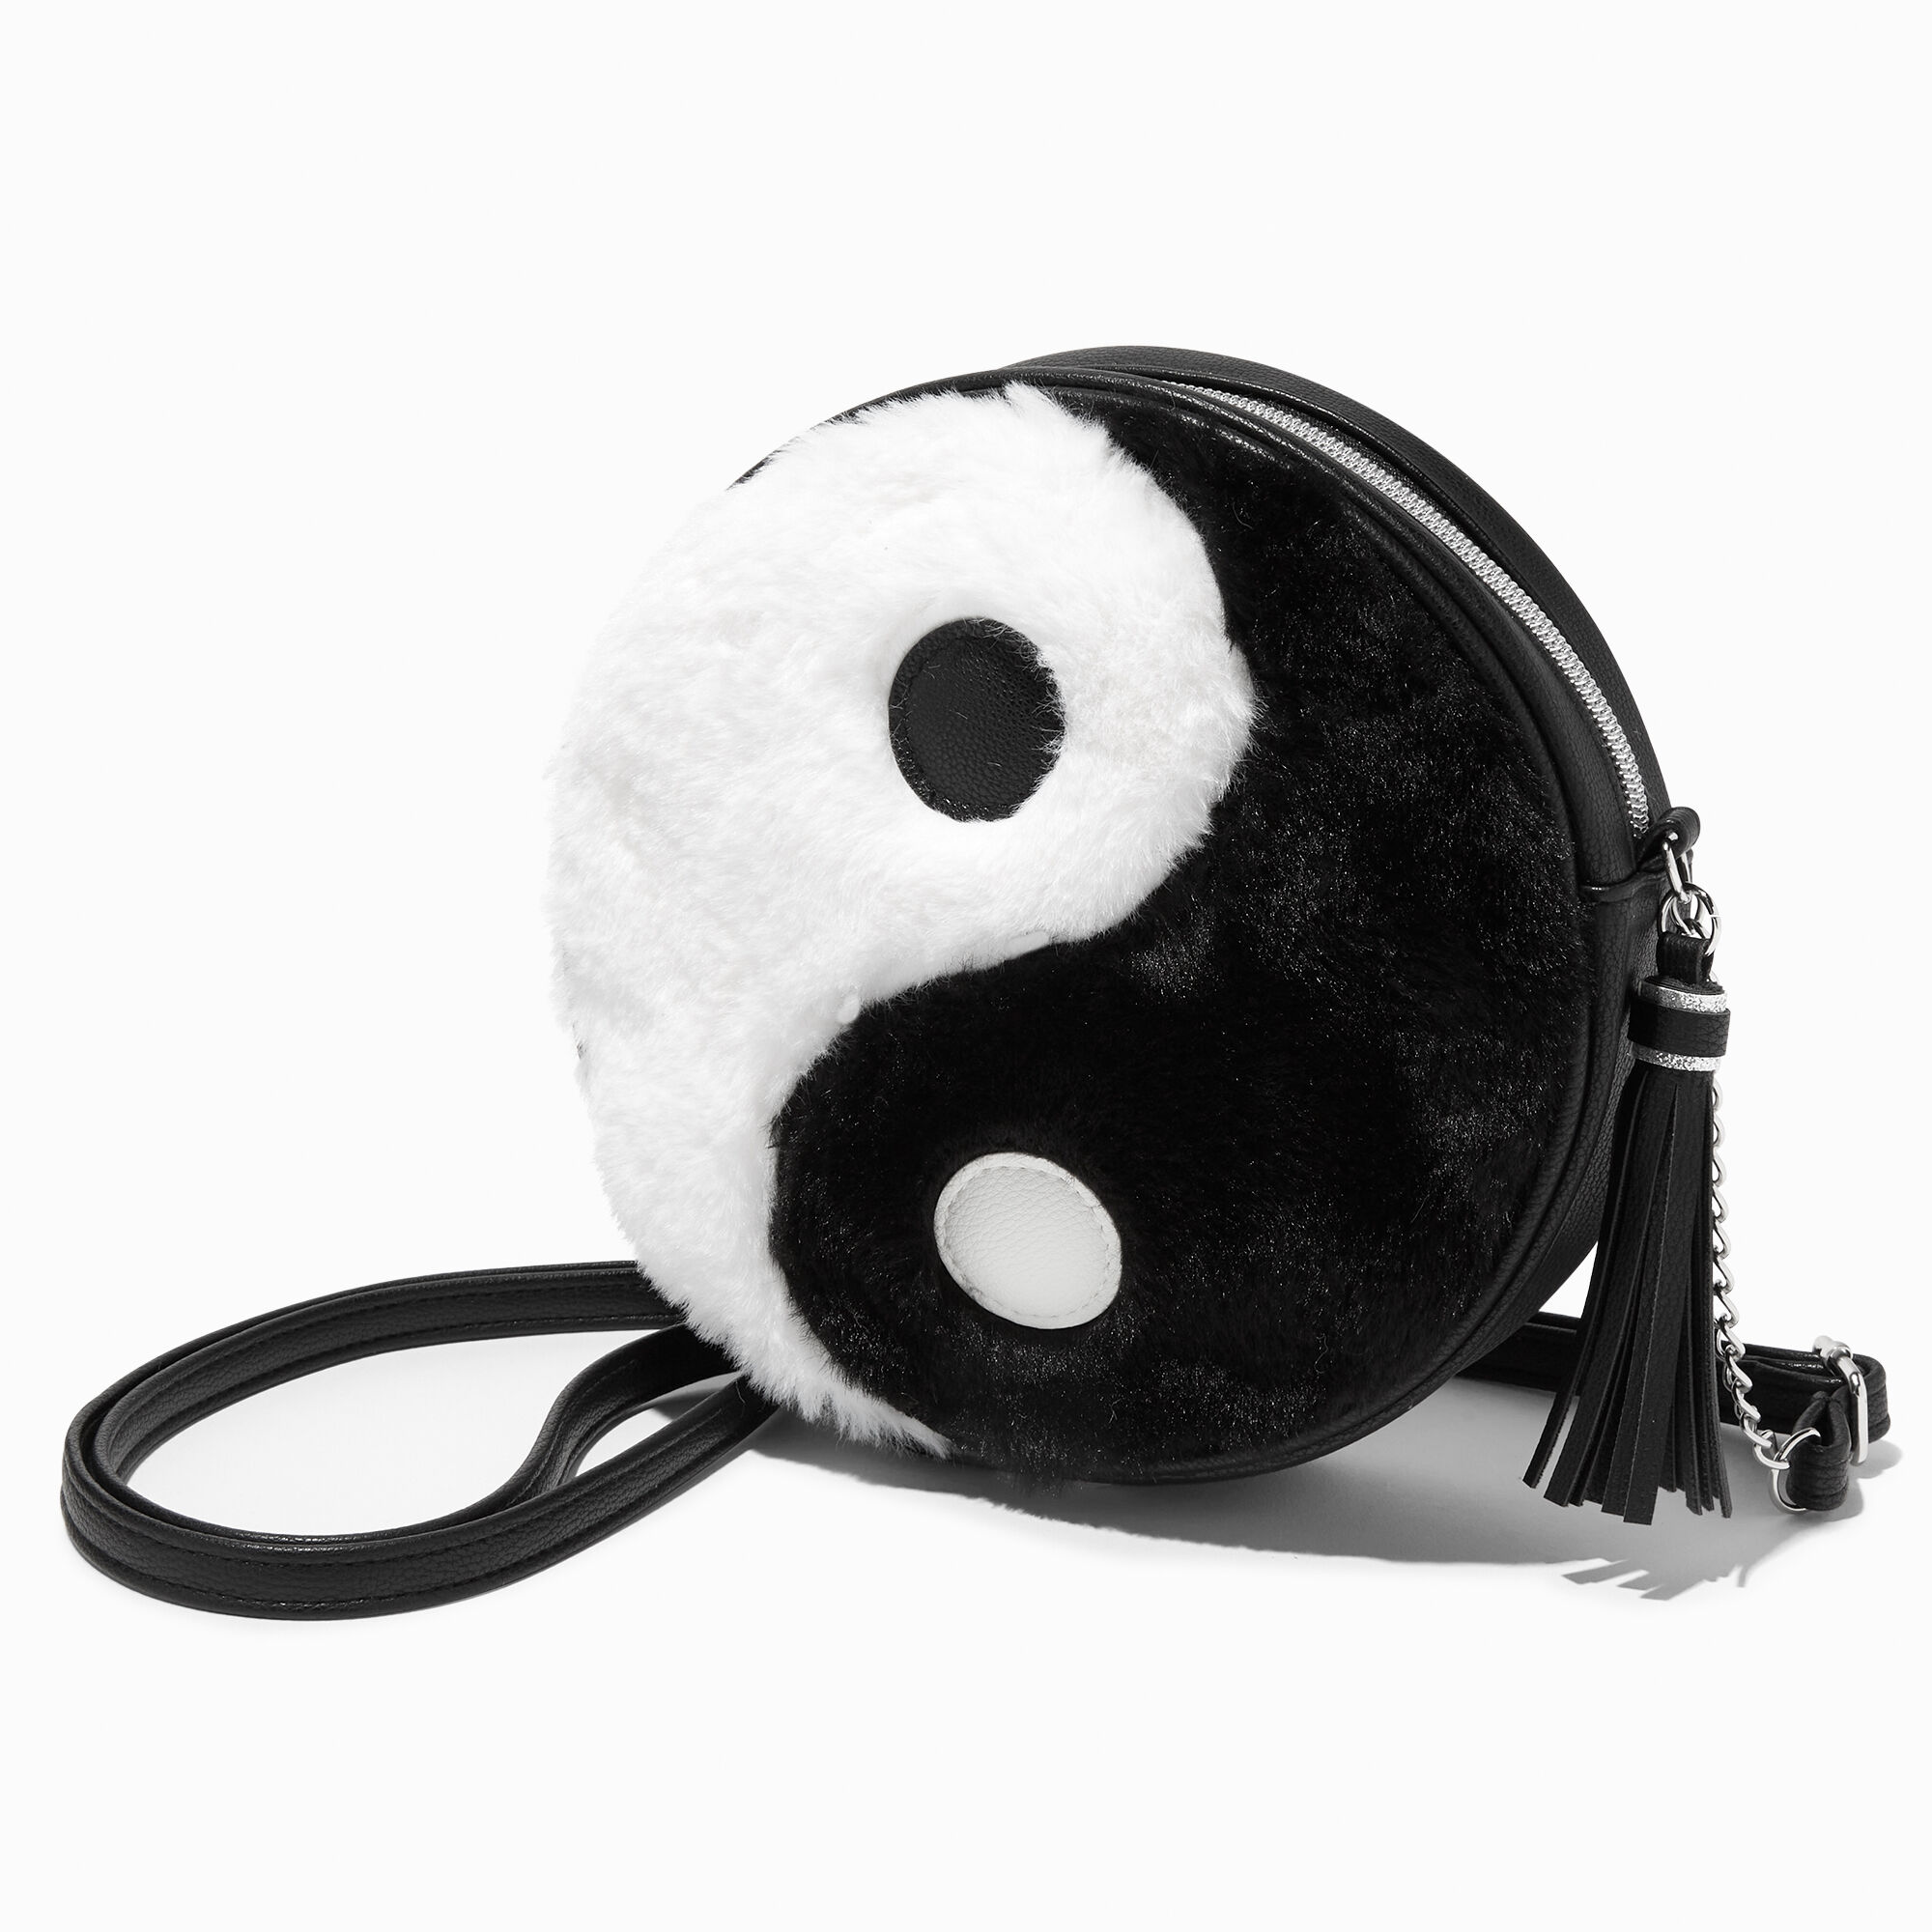 View Claires Furry Yin Yang Round Crossbody Bag information